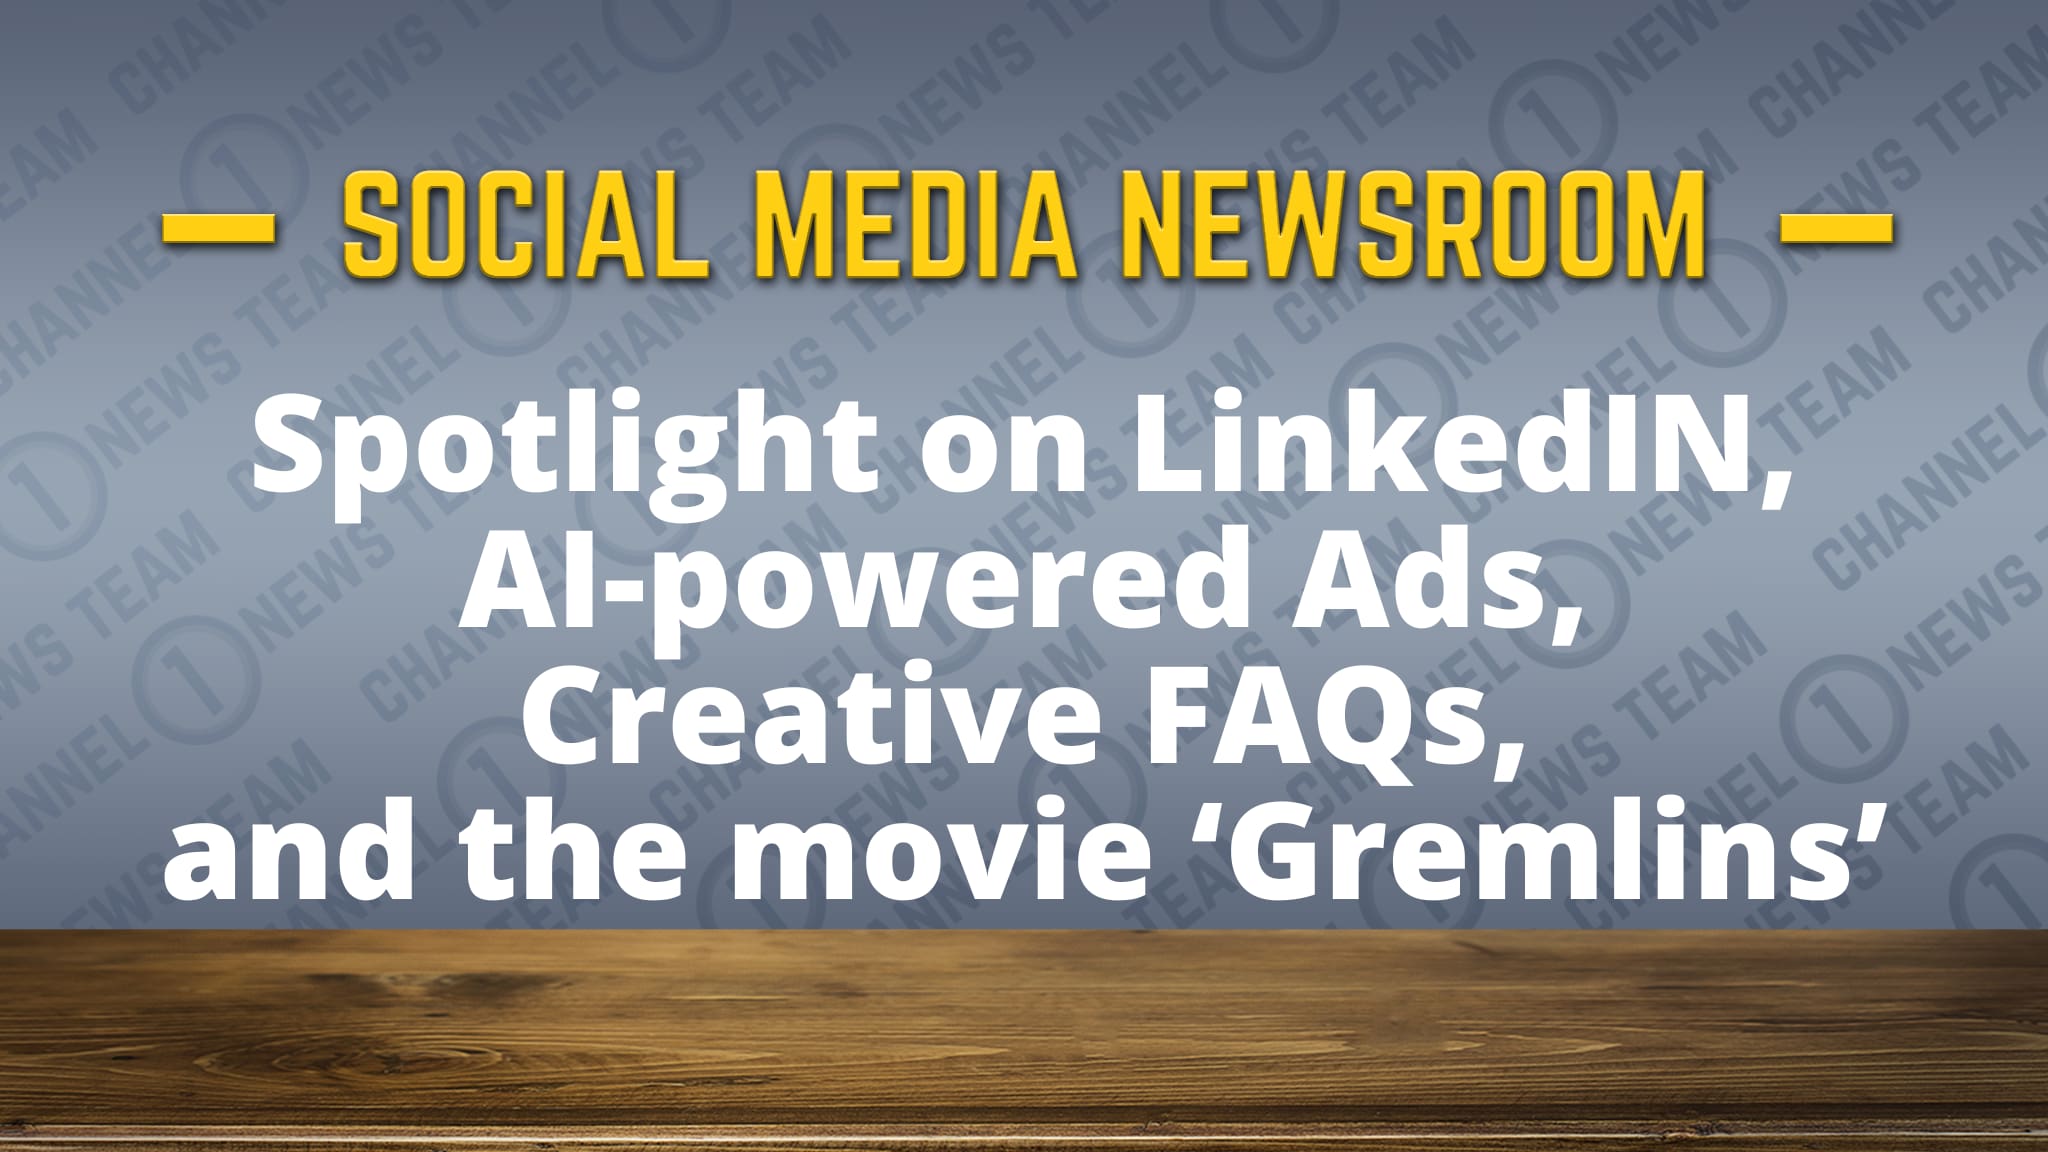 Spotlight on LinkedIn Updates, AI-powered ads, creative FAQs and ‘Gremlins’ – SMNR [Video]